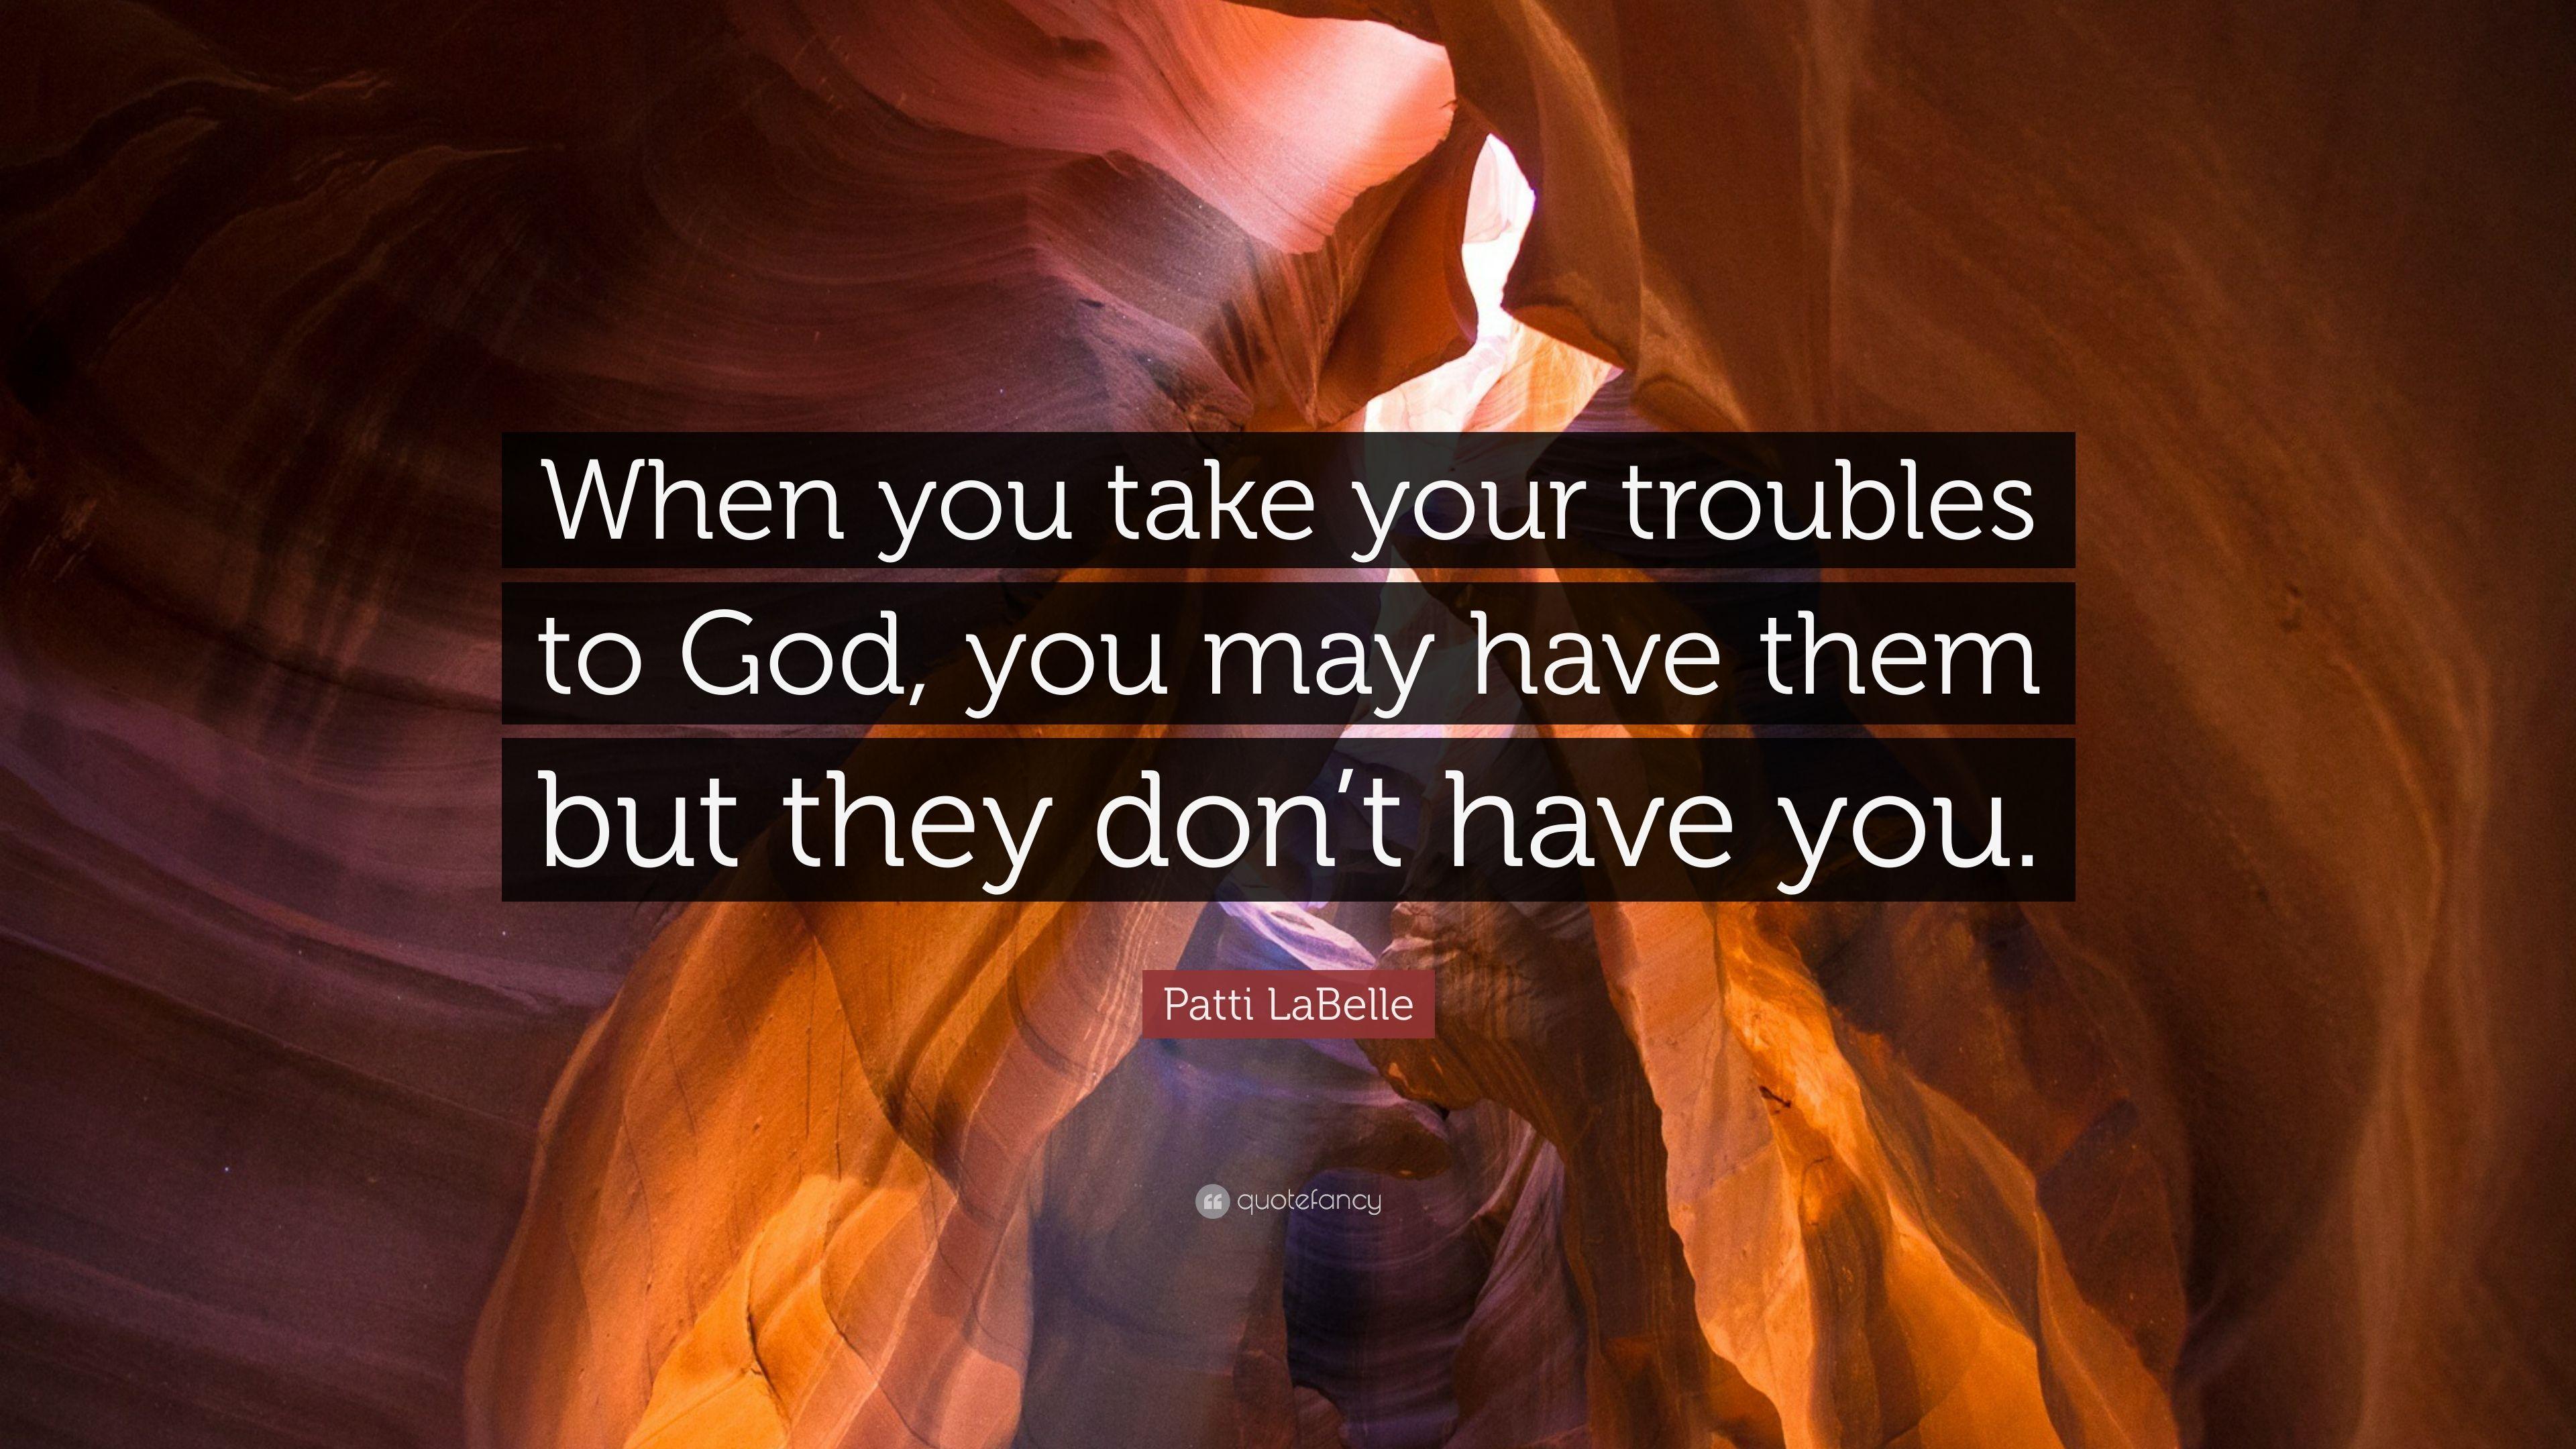 Patti LaBelle Quote: “When you take your troubles to God, you may